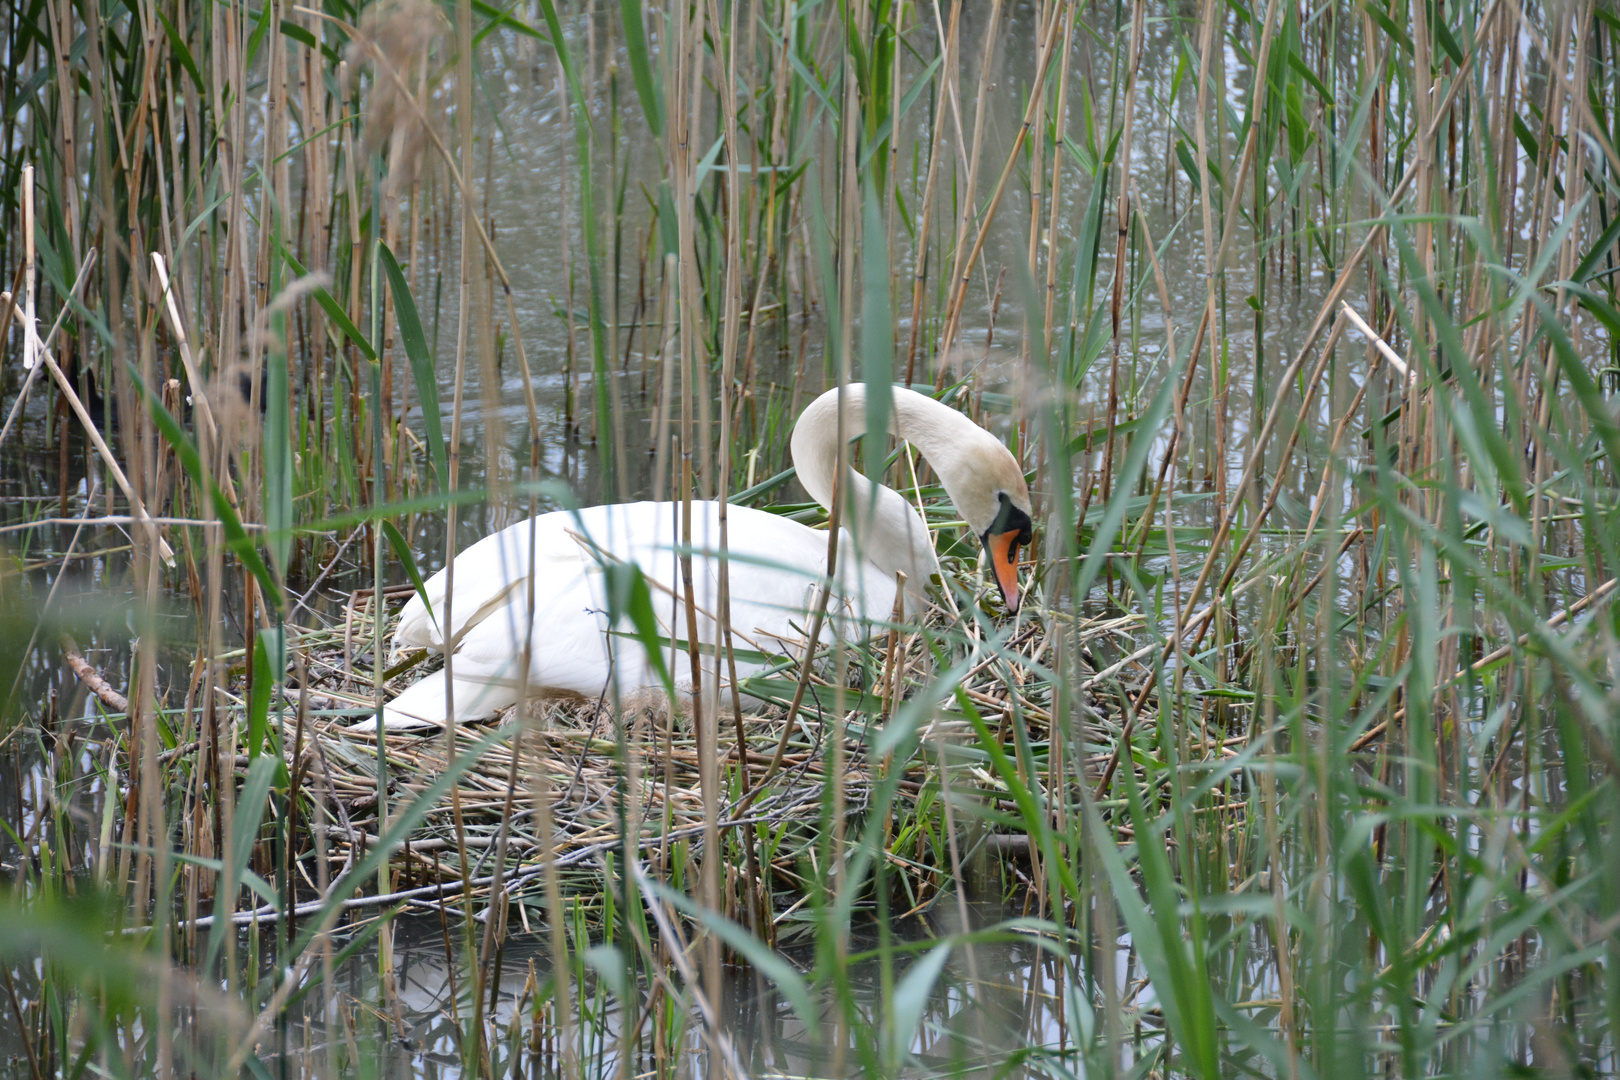 A mother swan broods her eggs in the middle of the reeds.